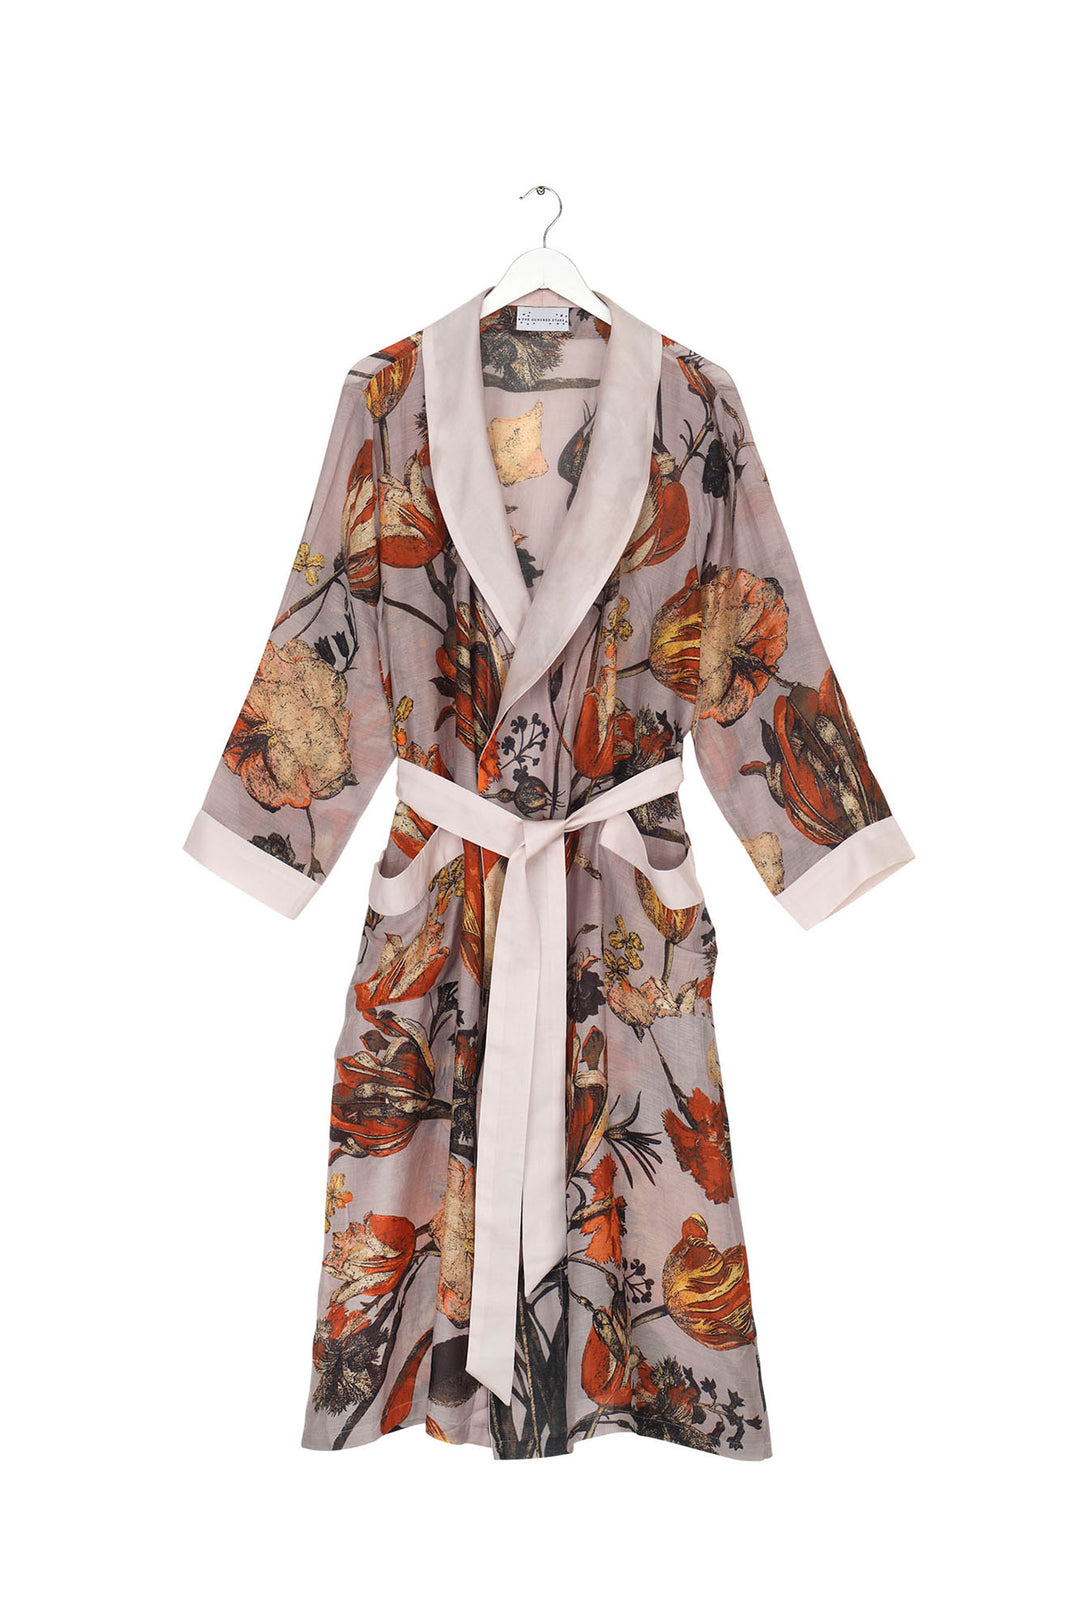 ladies long length belted dressing robe gown floral print features antique style tulips across a dusky pink background by One Hundred Stars